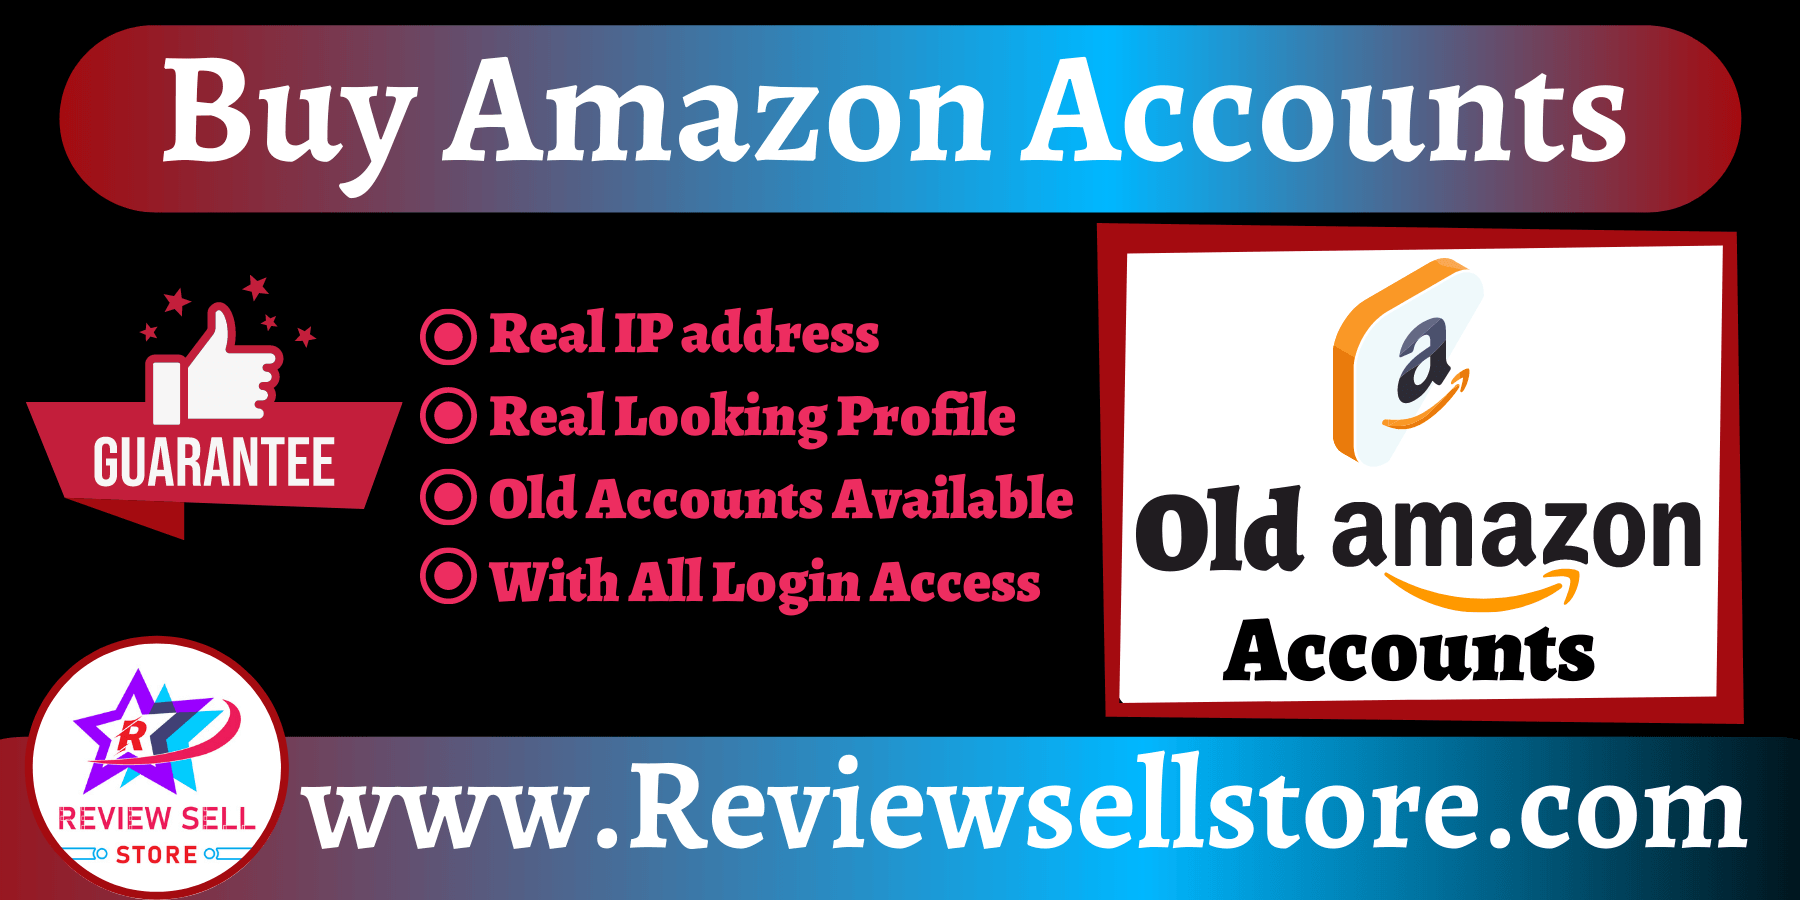 Buy Amazon Accounts - Old And Seller Accounts Available